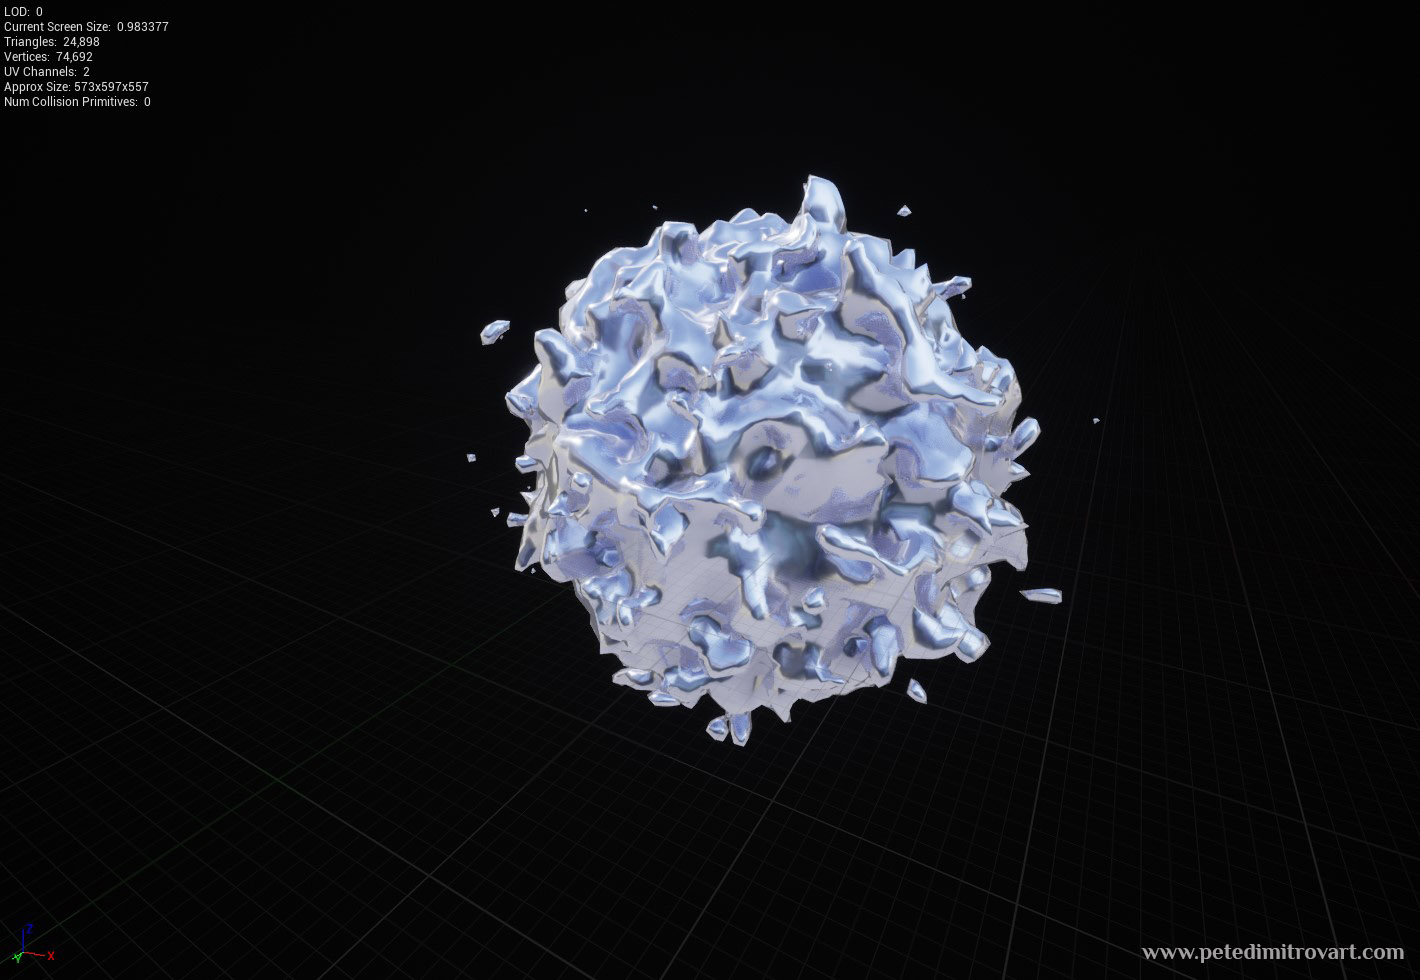 Unreal 4 screenshot. Viewport look of the fuzzy orb mesh. It looks whole, top side reads “24,898 triangles”.